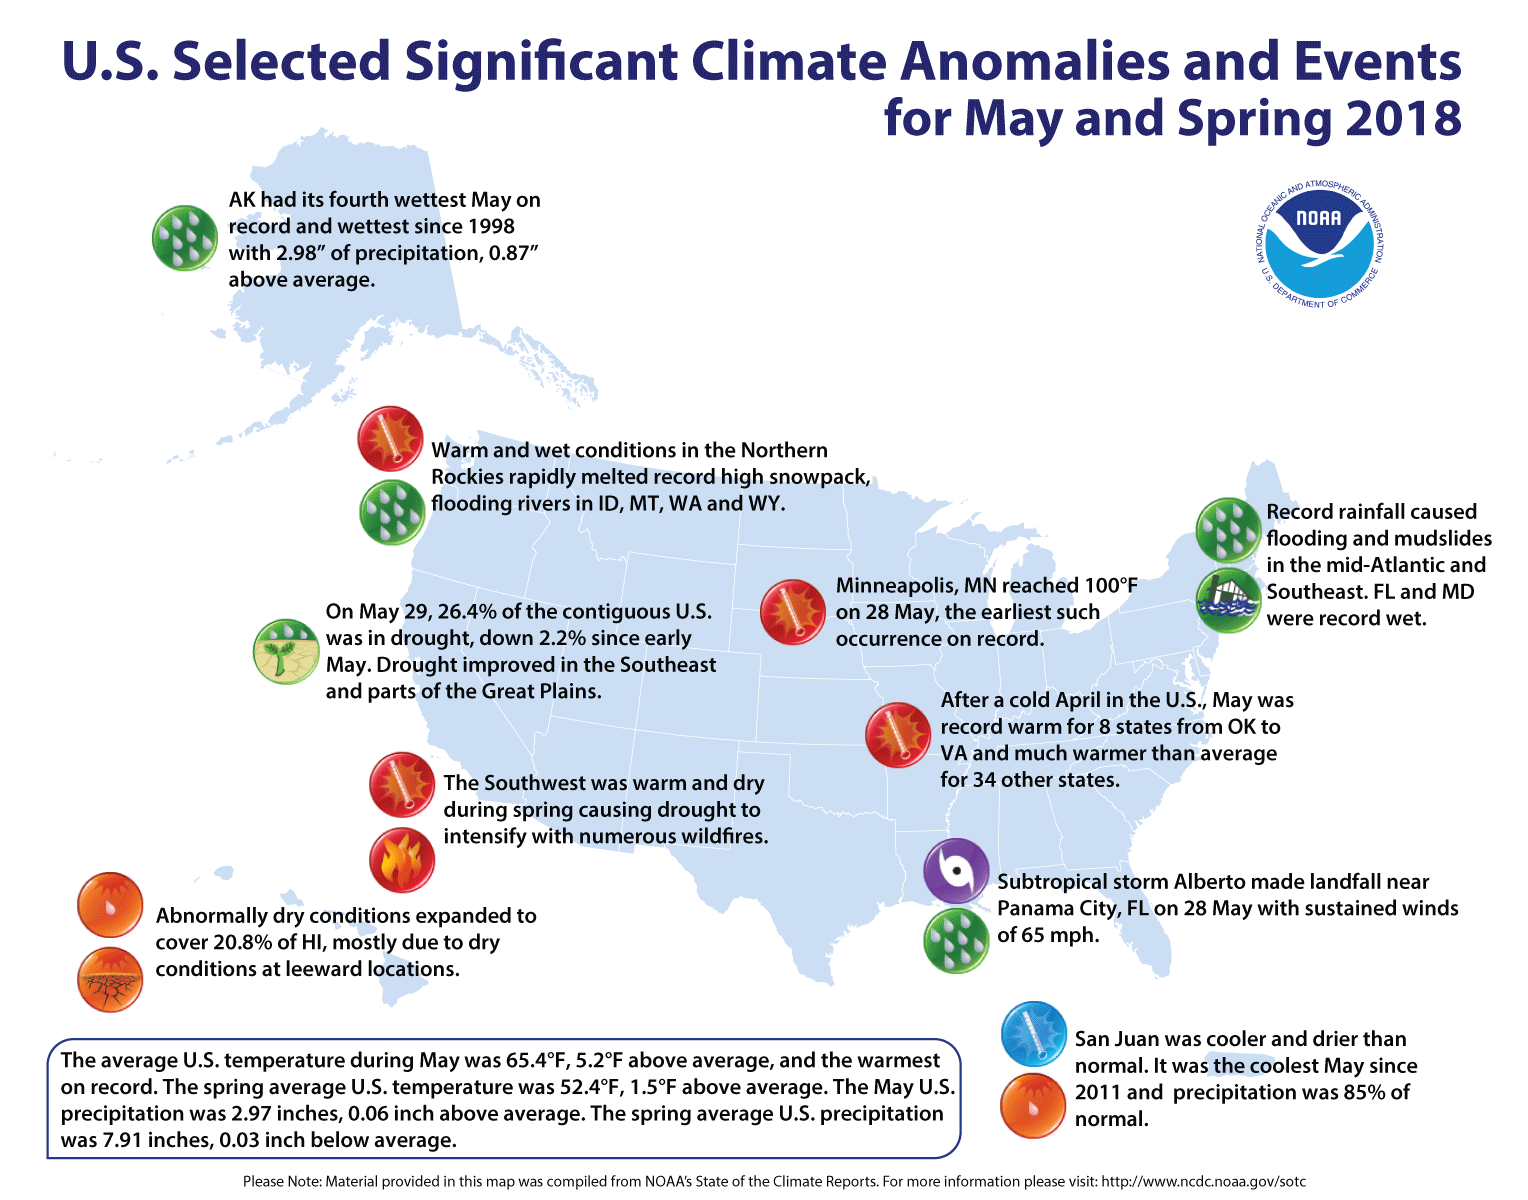 https://www.ncei.noaa.gov/monitoring-content/sotc/national/2018/may/monthlysigeventmap-052018.gif